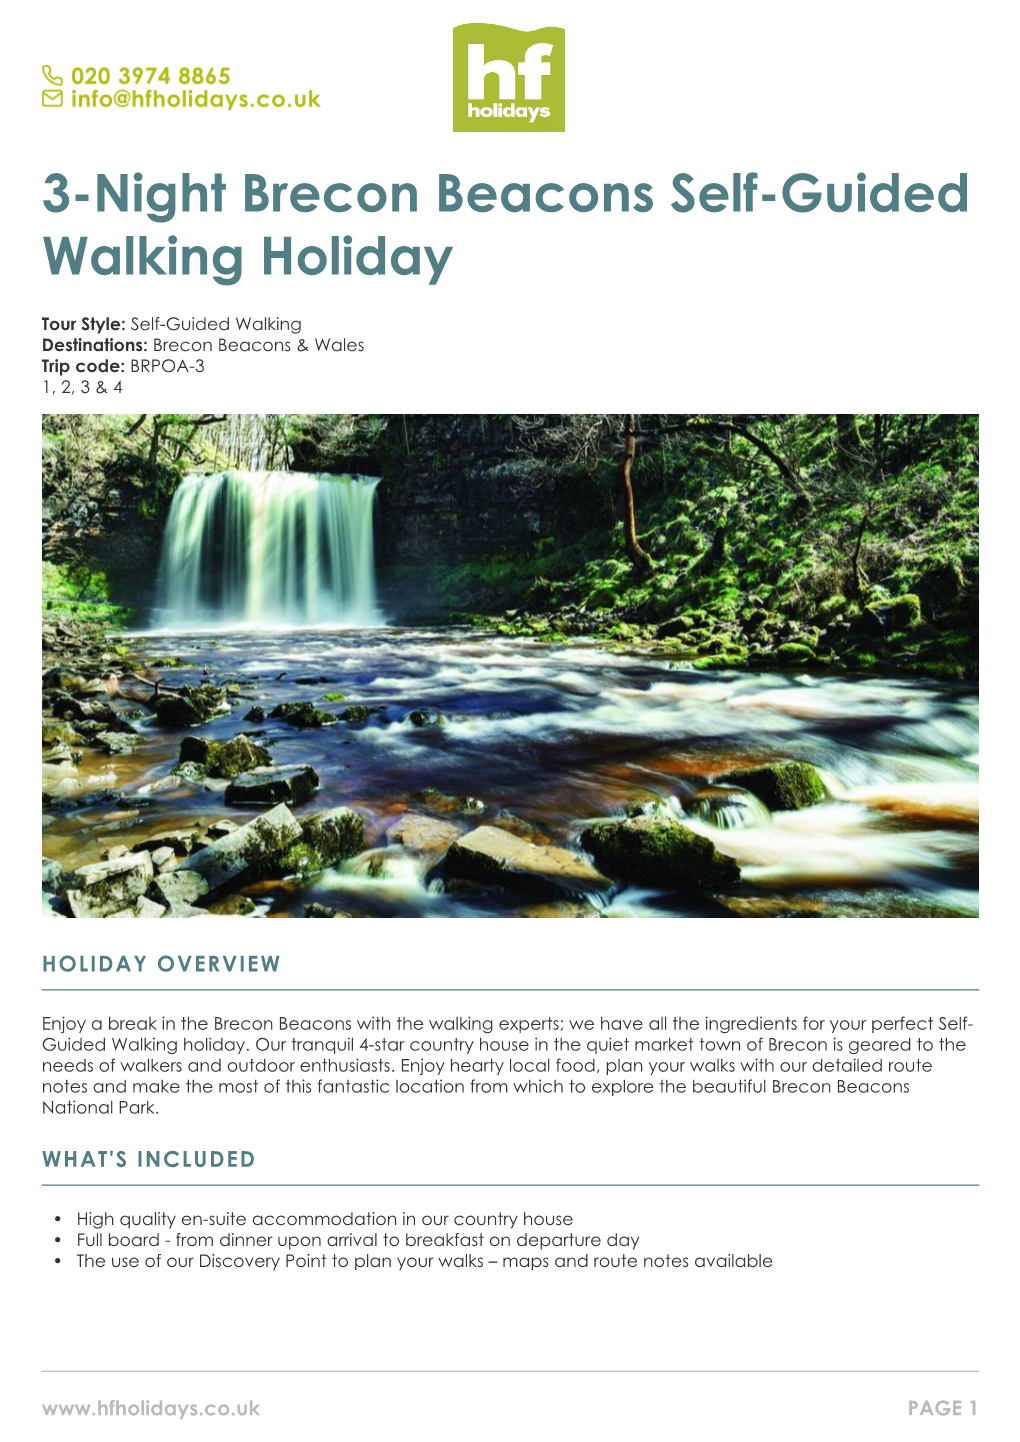 3-Night Brecon Beacons Self-Guided Walking Holiday